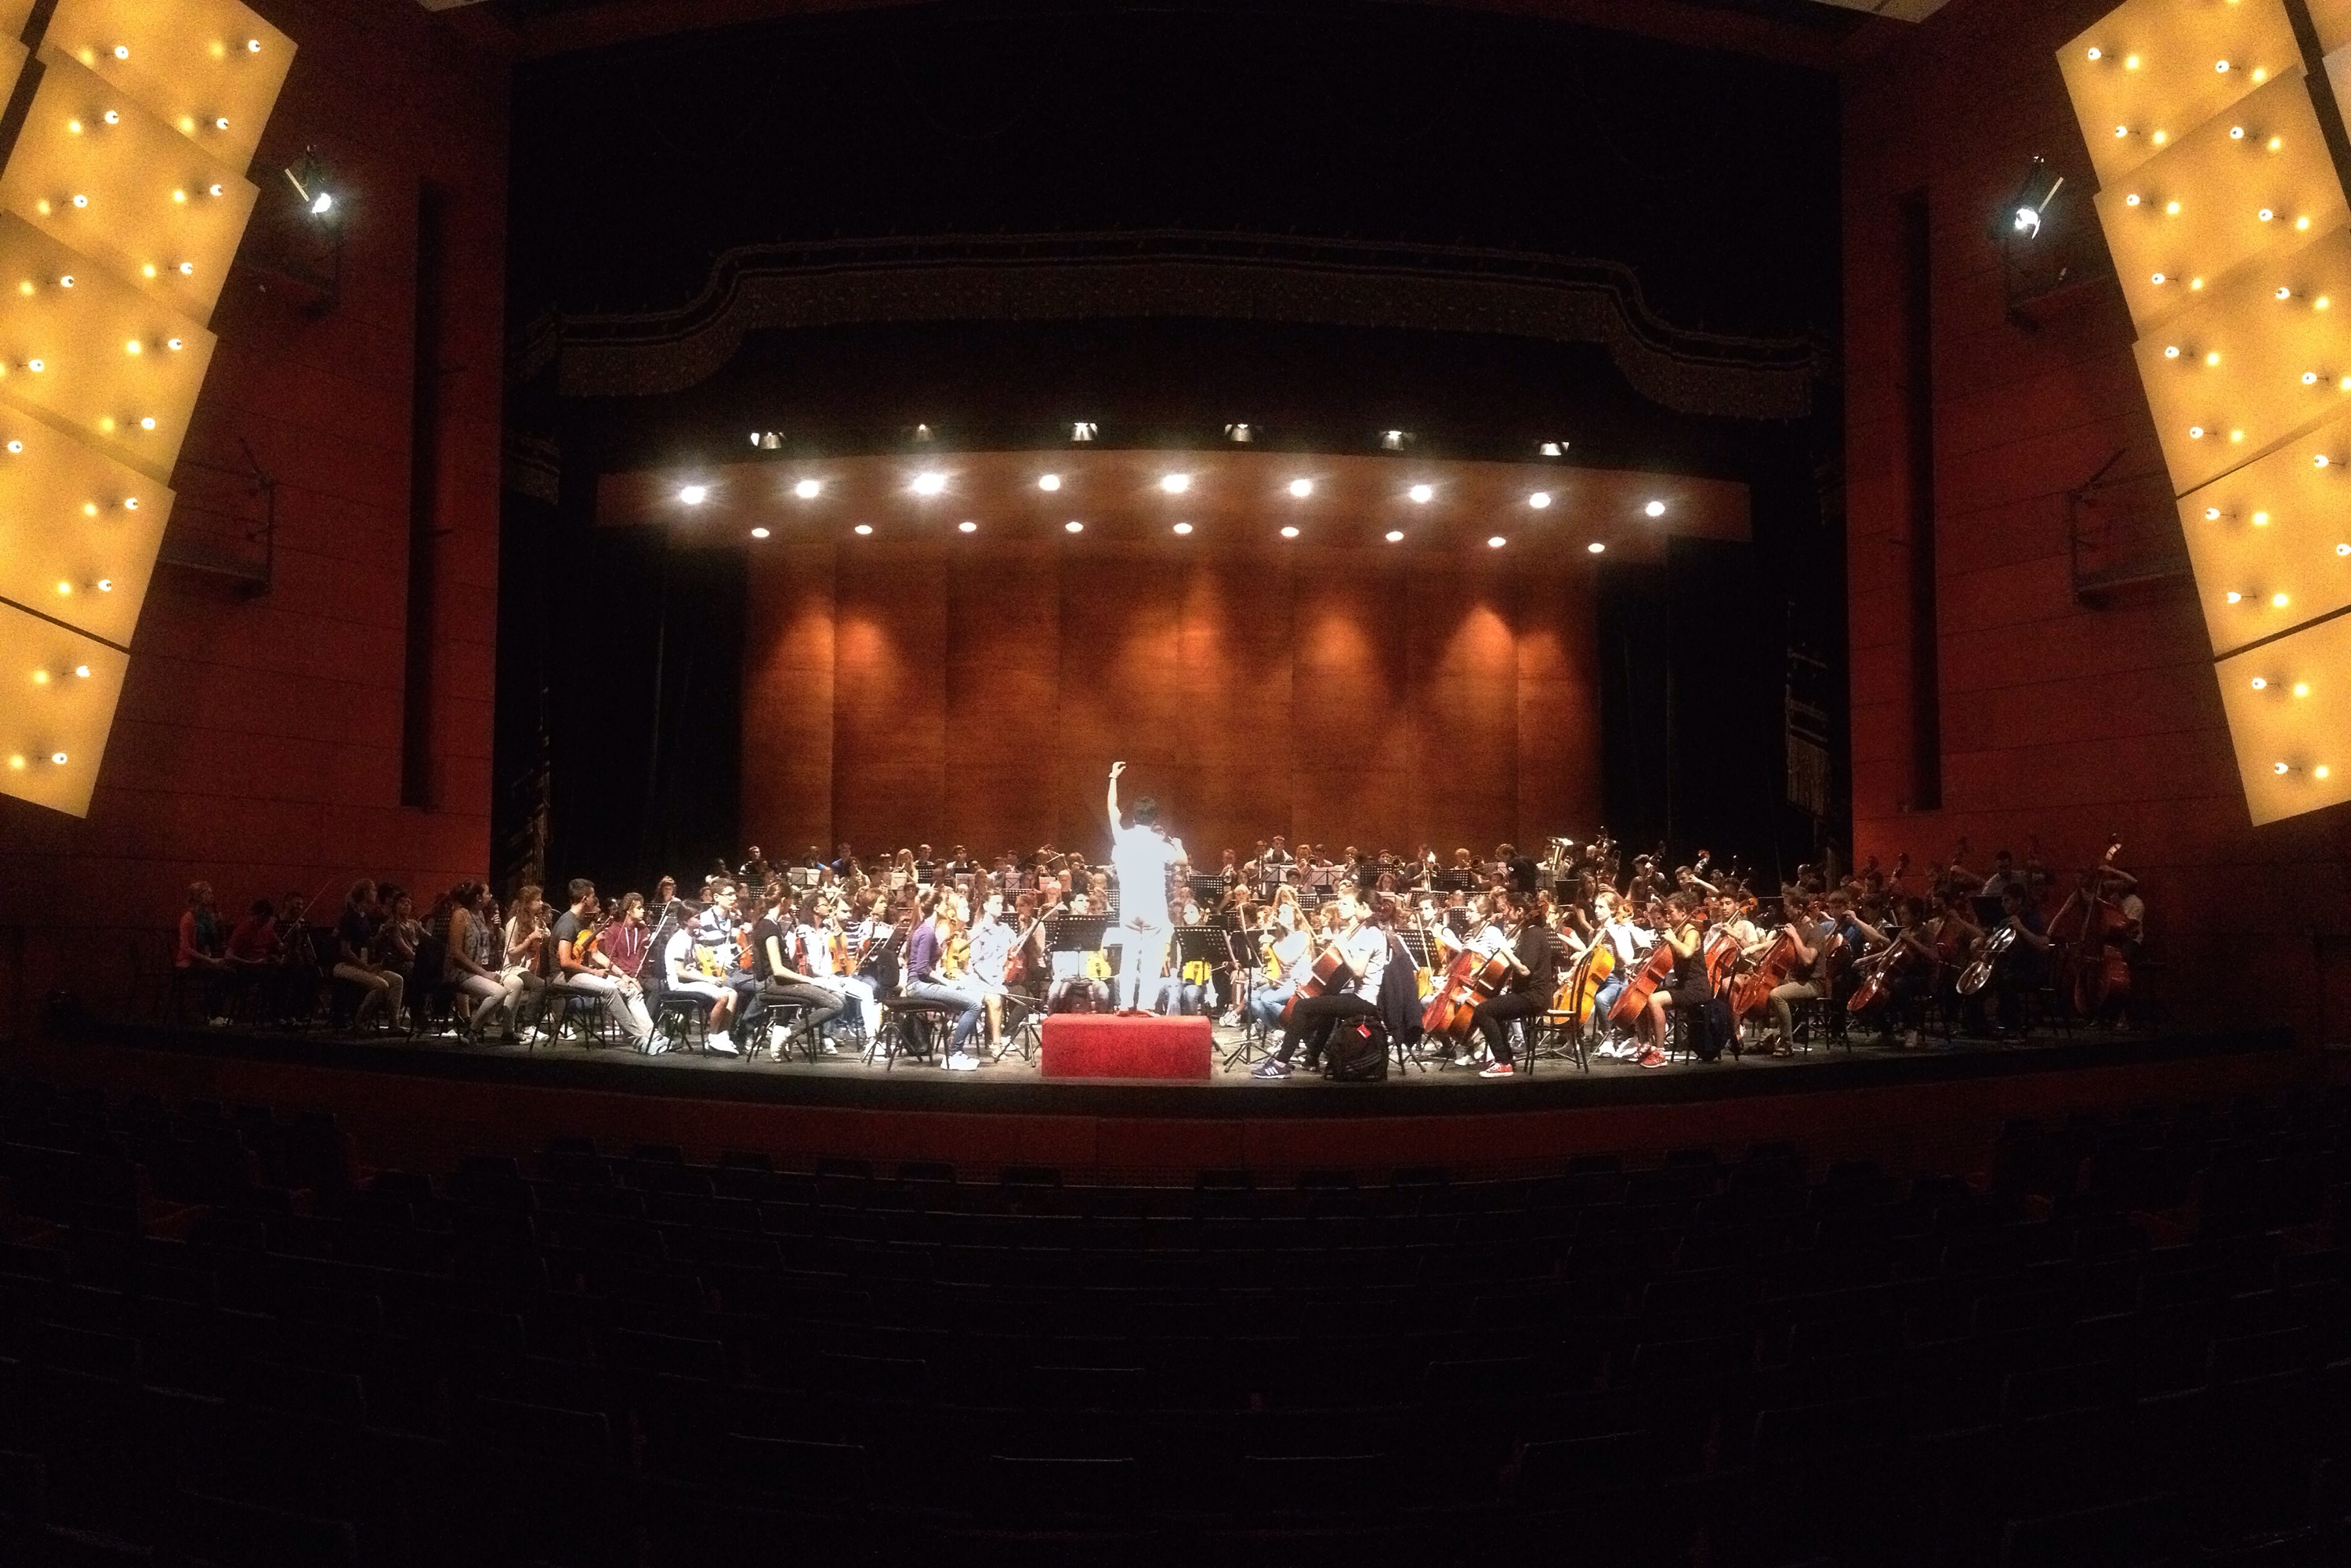 The full Sistema Europe Youth Orchestra playing together for the first time in Teatro degli Arcimboldi